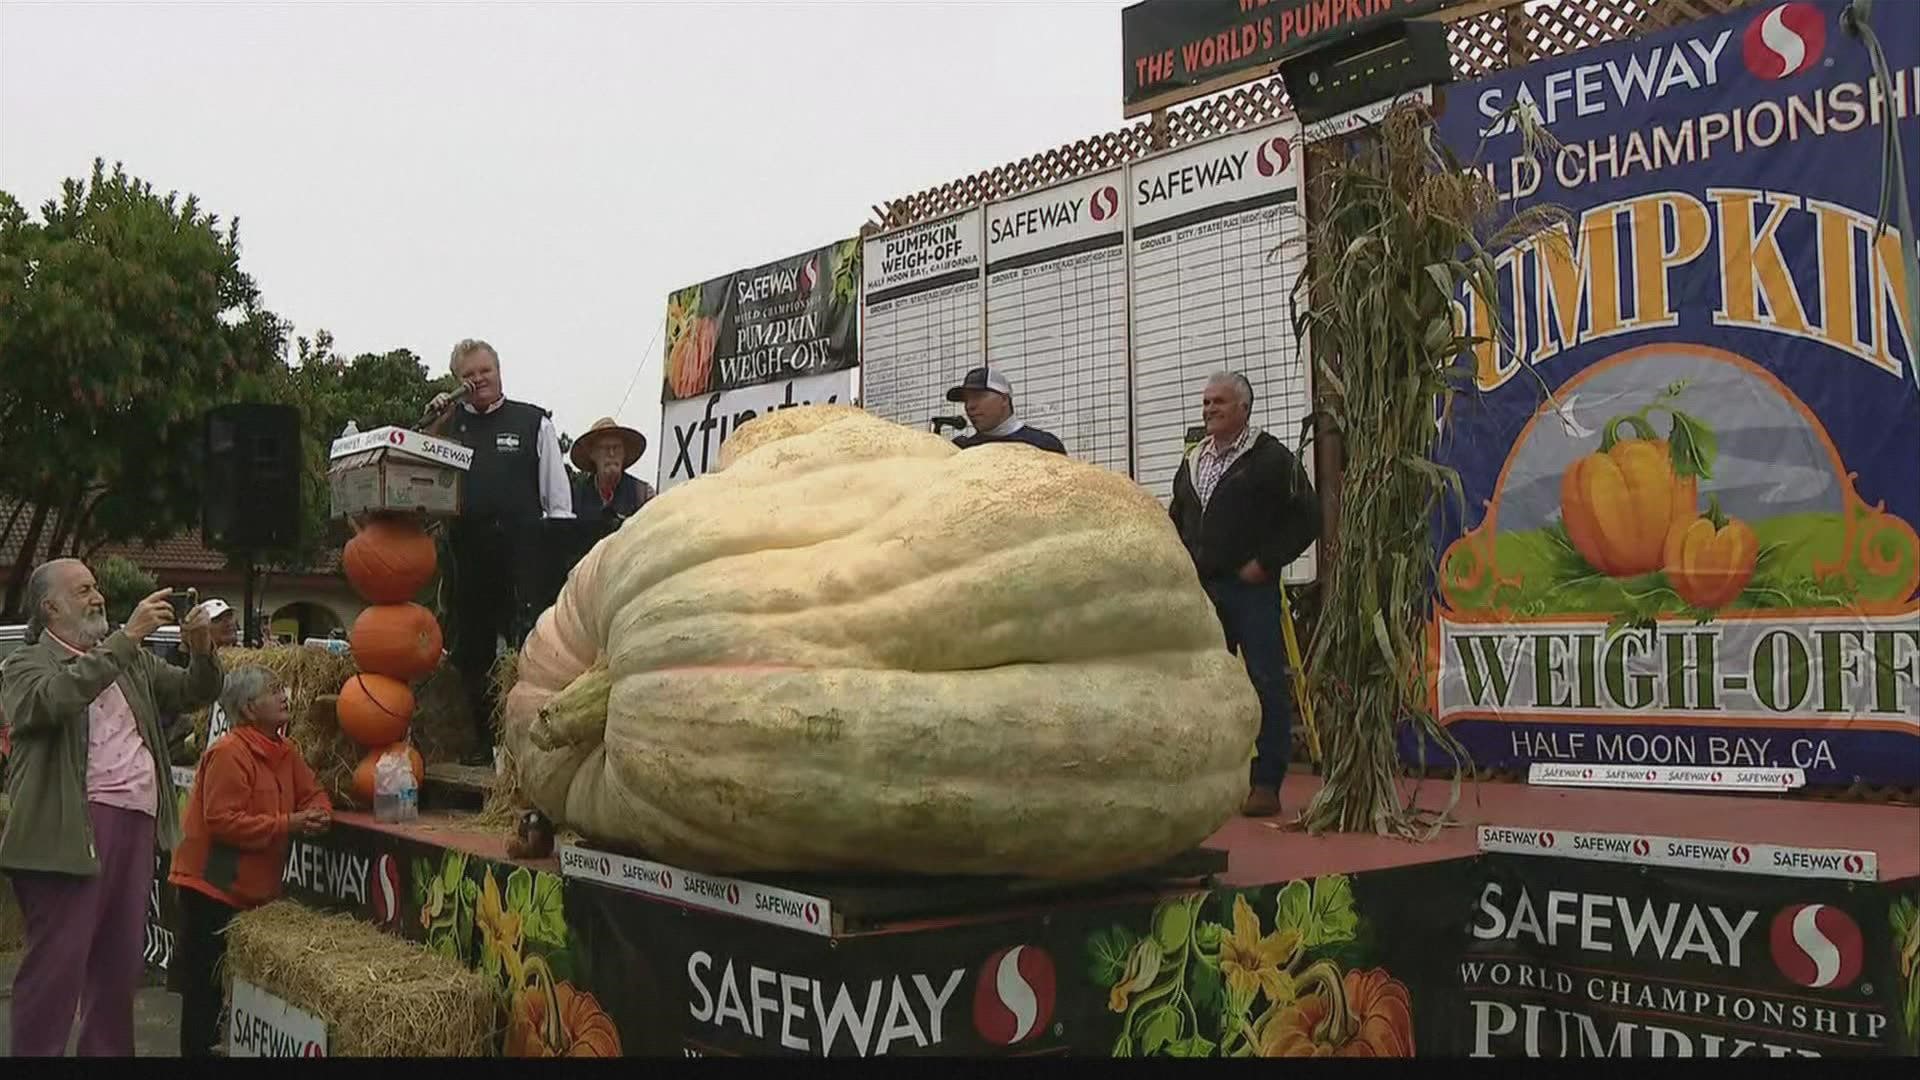 A horticulture teacher from Minnesota set a new US record Monday for the heaviest pumpkin after raising a giant gourd weighing 2,560 pounds.